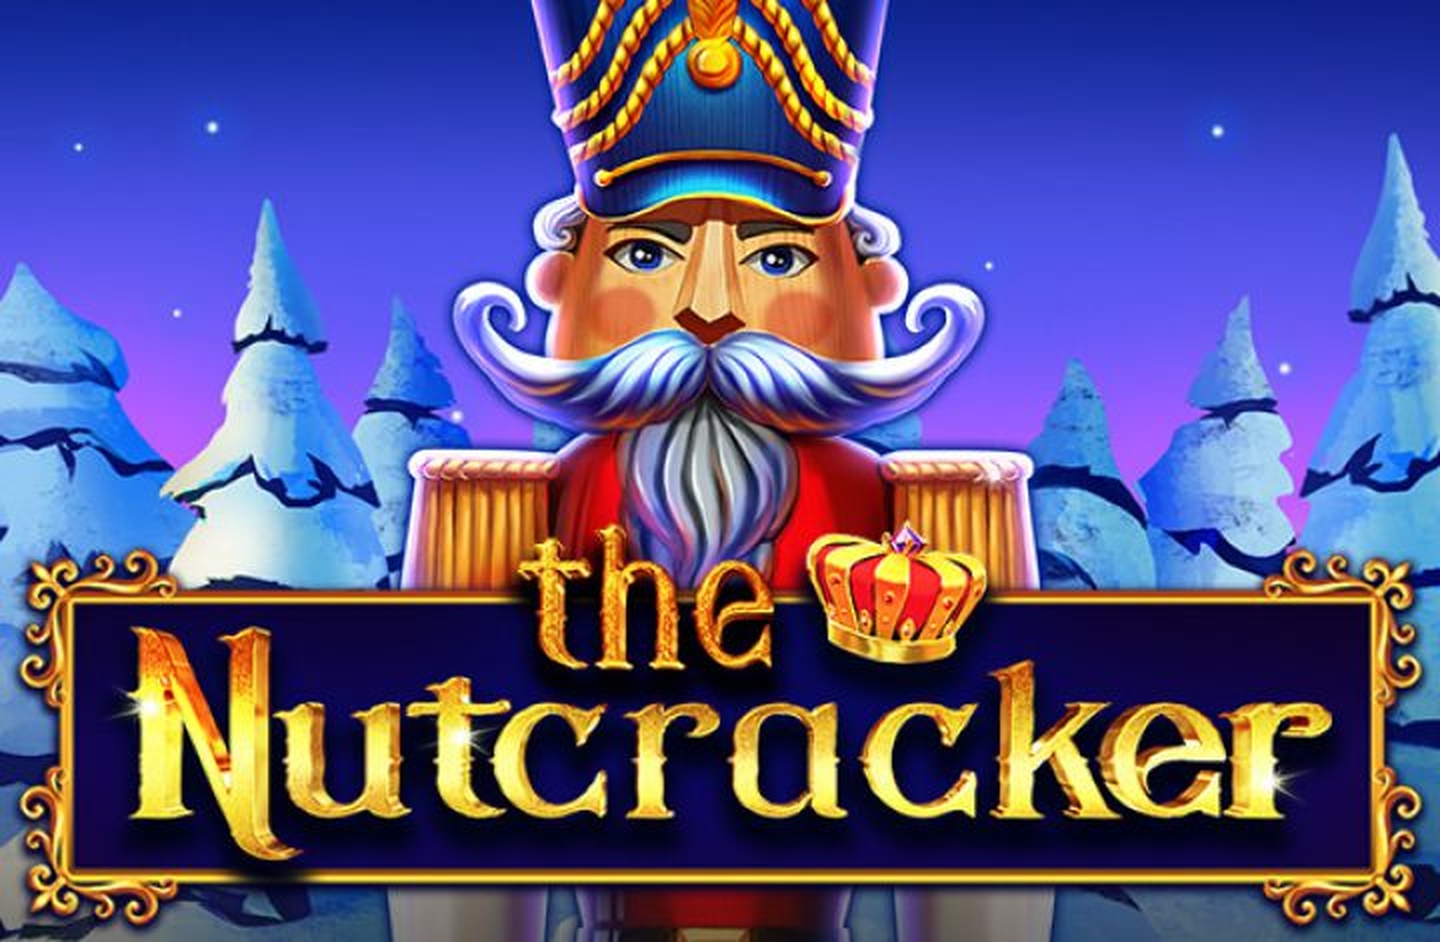 The The Nutcracker Online Slot Demo Game by iSoftBet